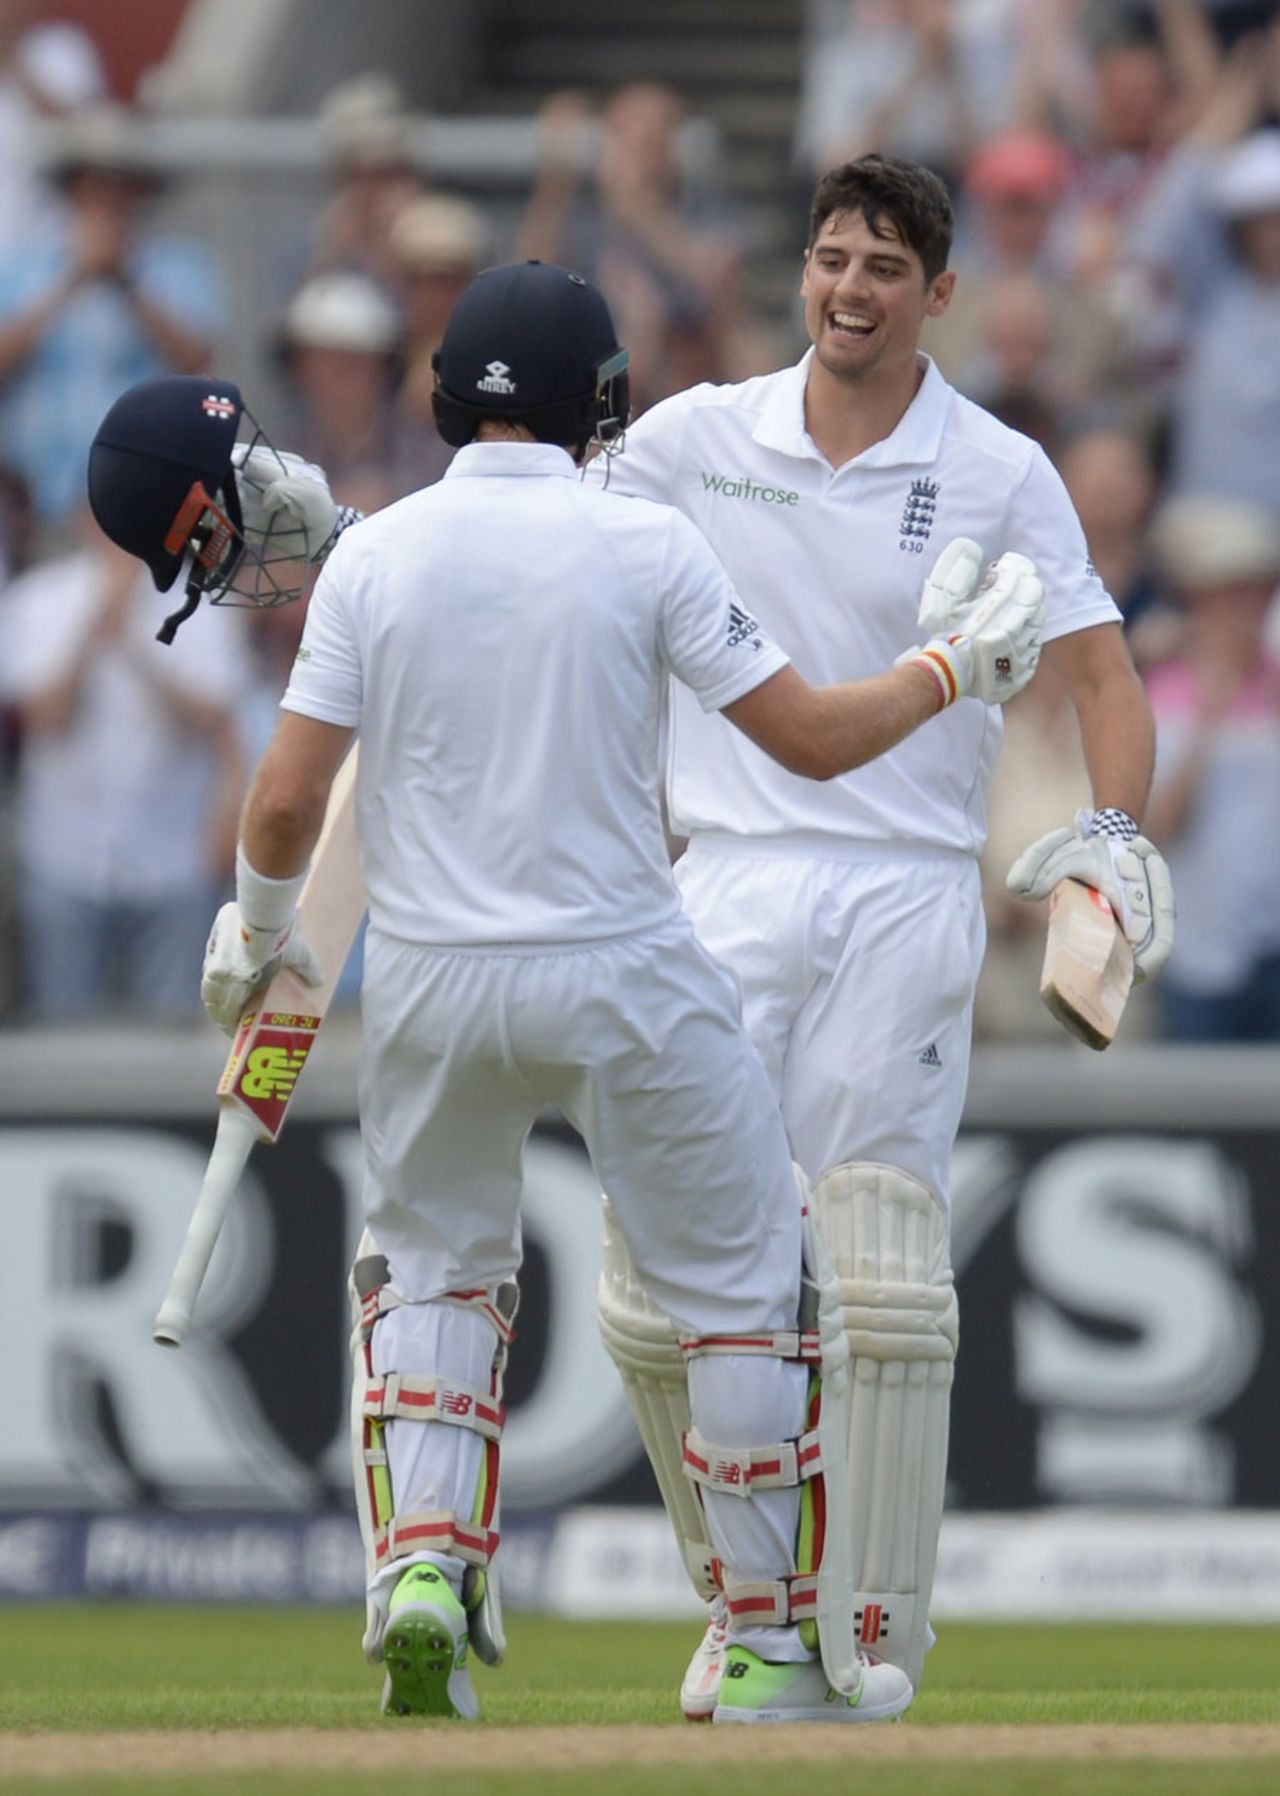 Alastair Cook gets a hug from Joe Root after notching a century, England v Pakistan, 2nd Investec Test, Old Trafford, 1st day, July 22, 2016